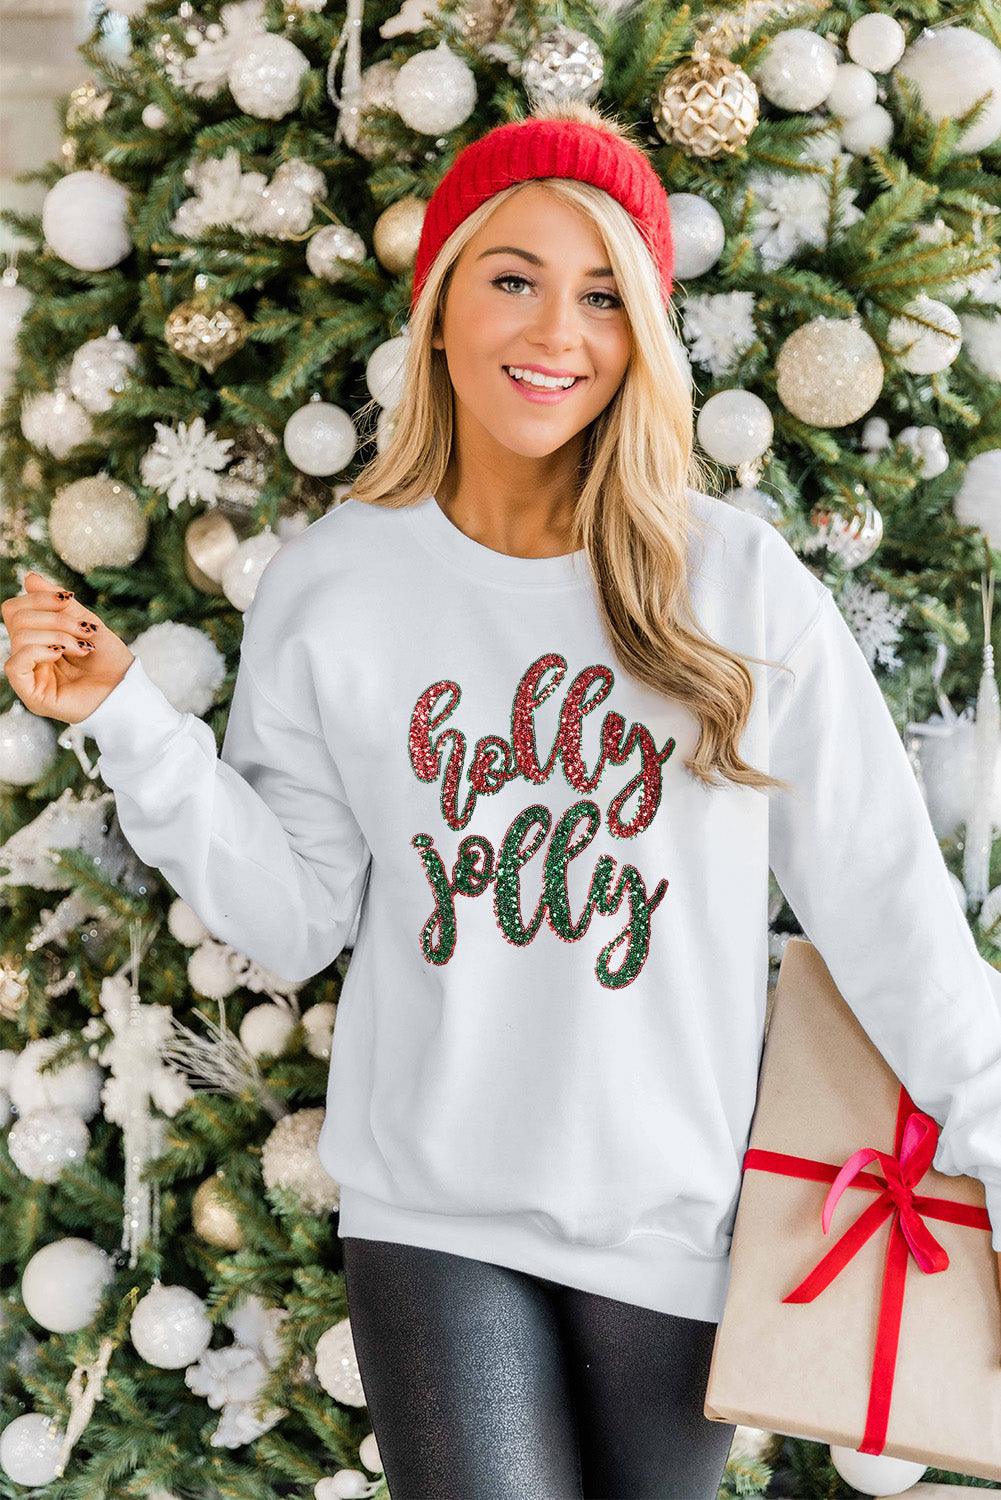 White Sequined holly jolly Graphic Christmas Sweatshirt - L & M Kee, LLC